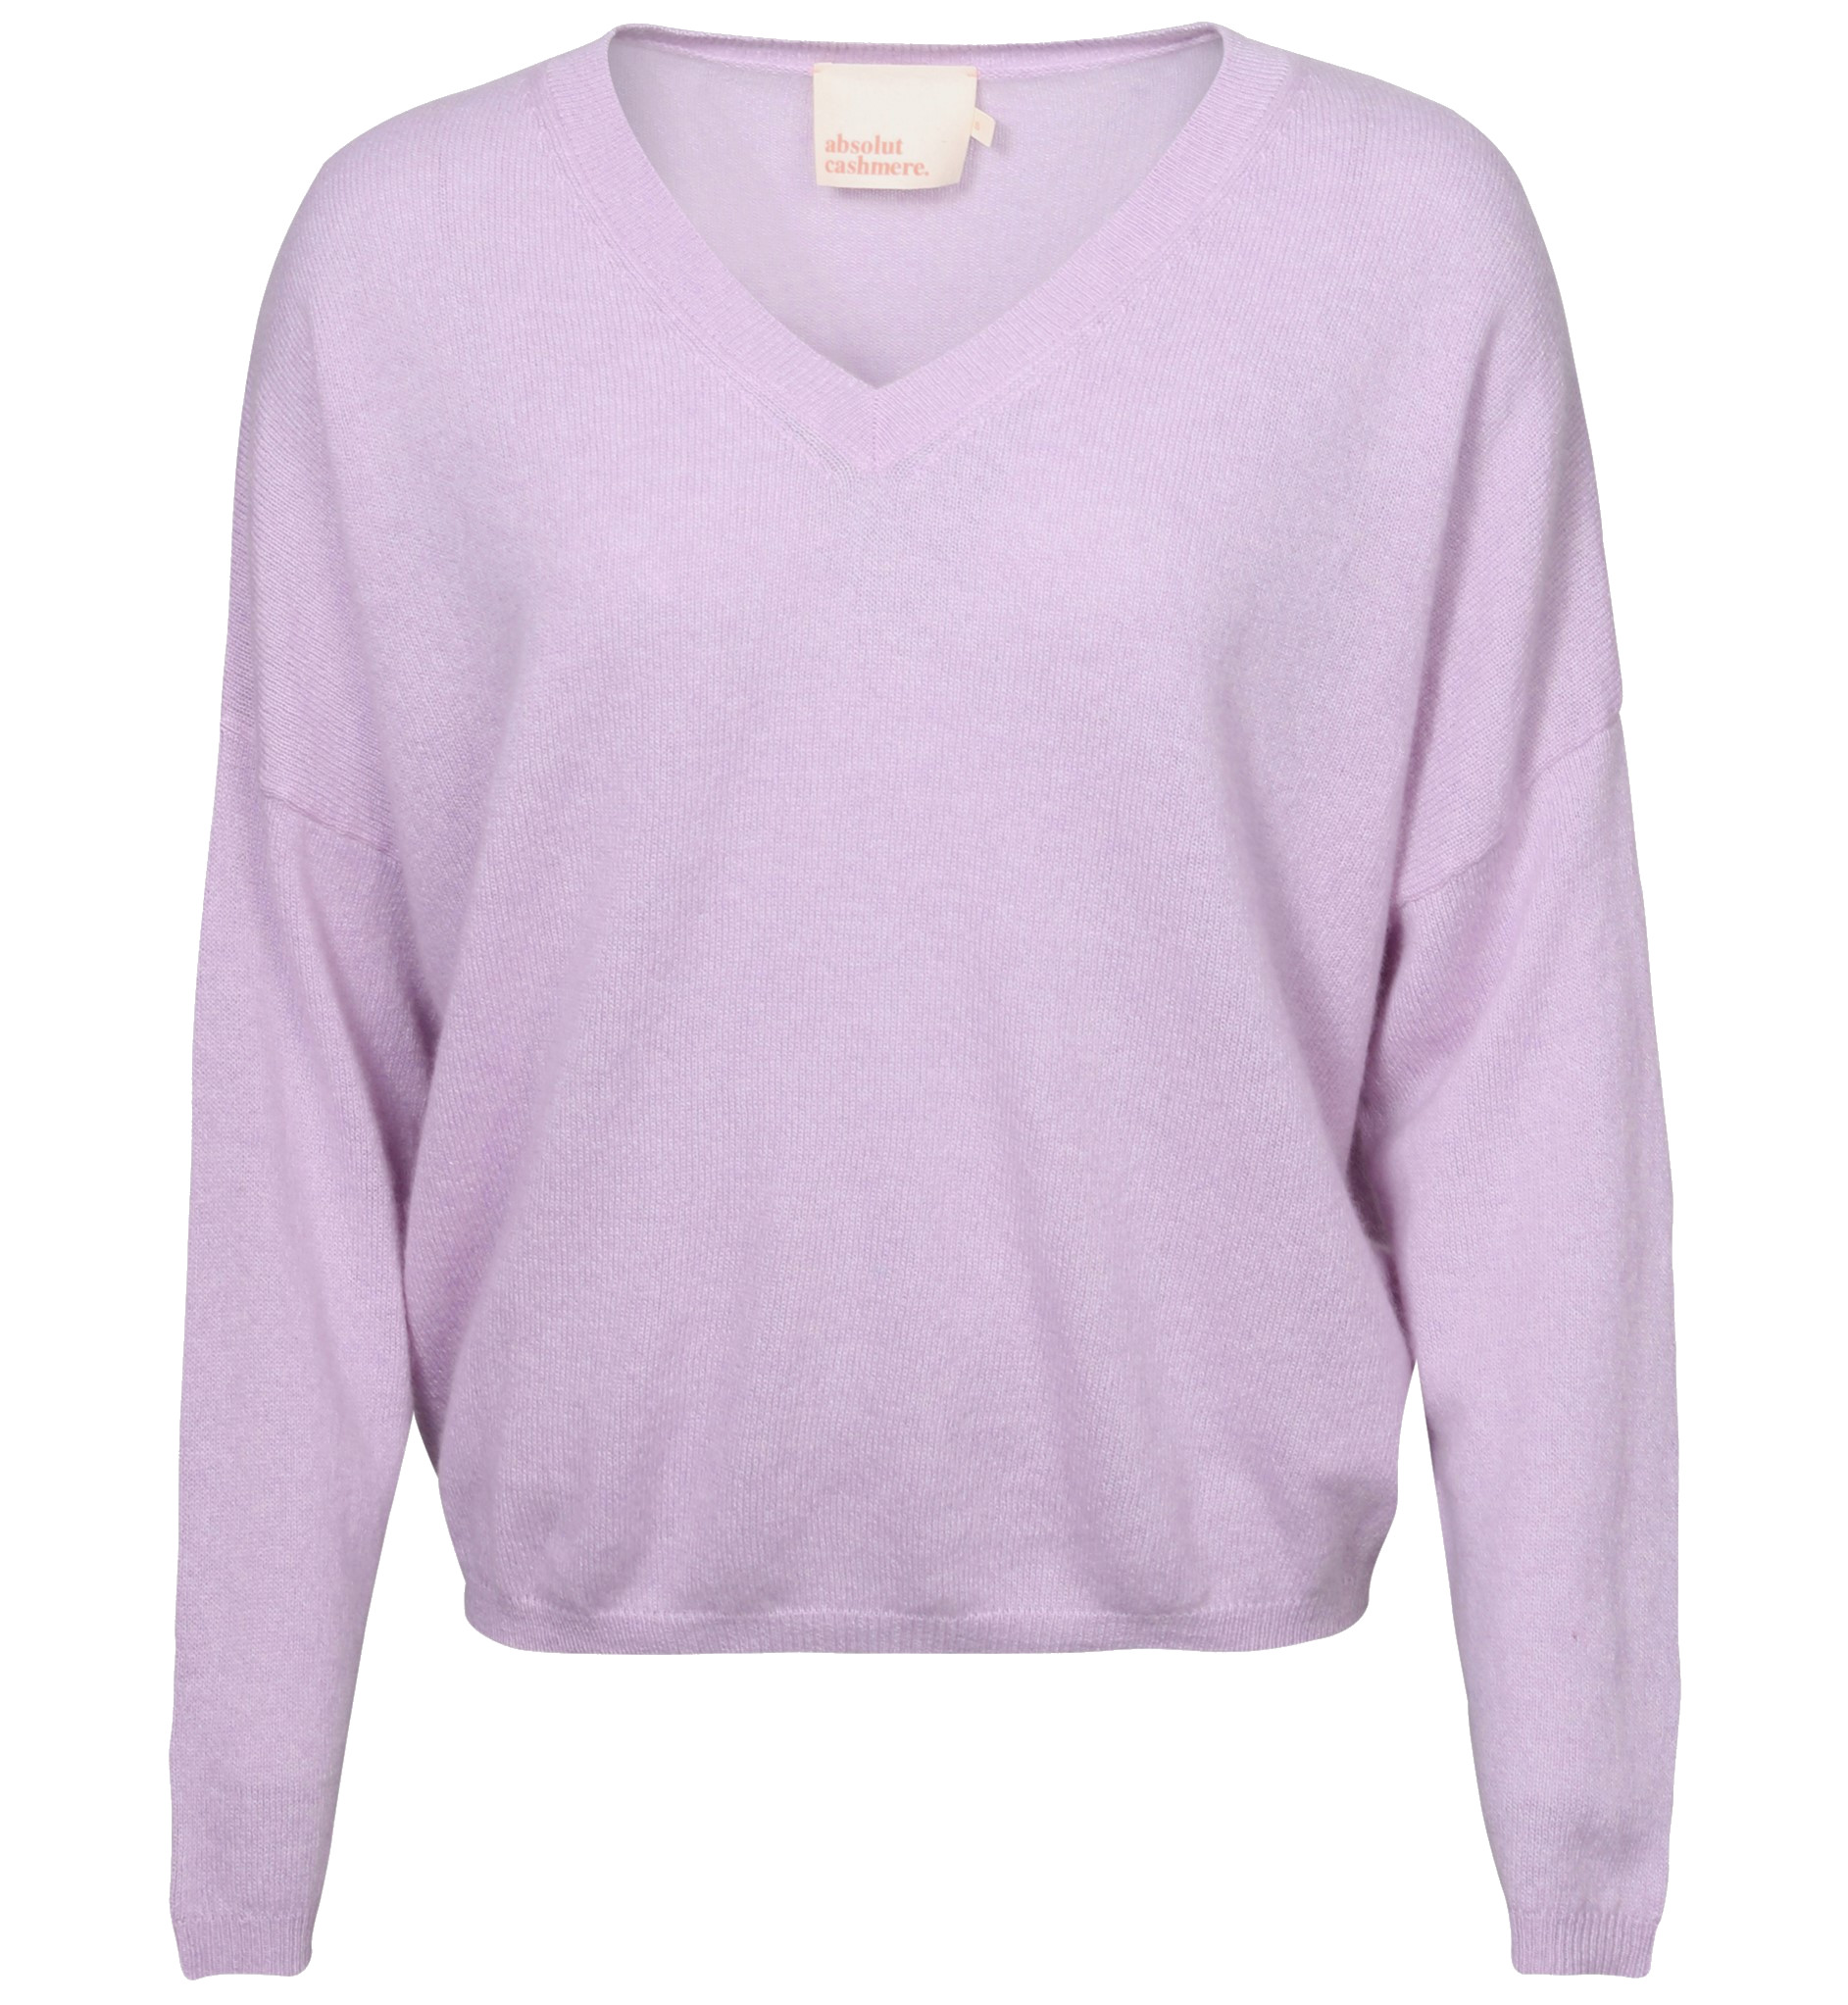 ABSOLUT CASHMERE V-Neck Sweater Alicia in Light Lilac XS